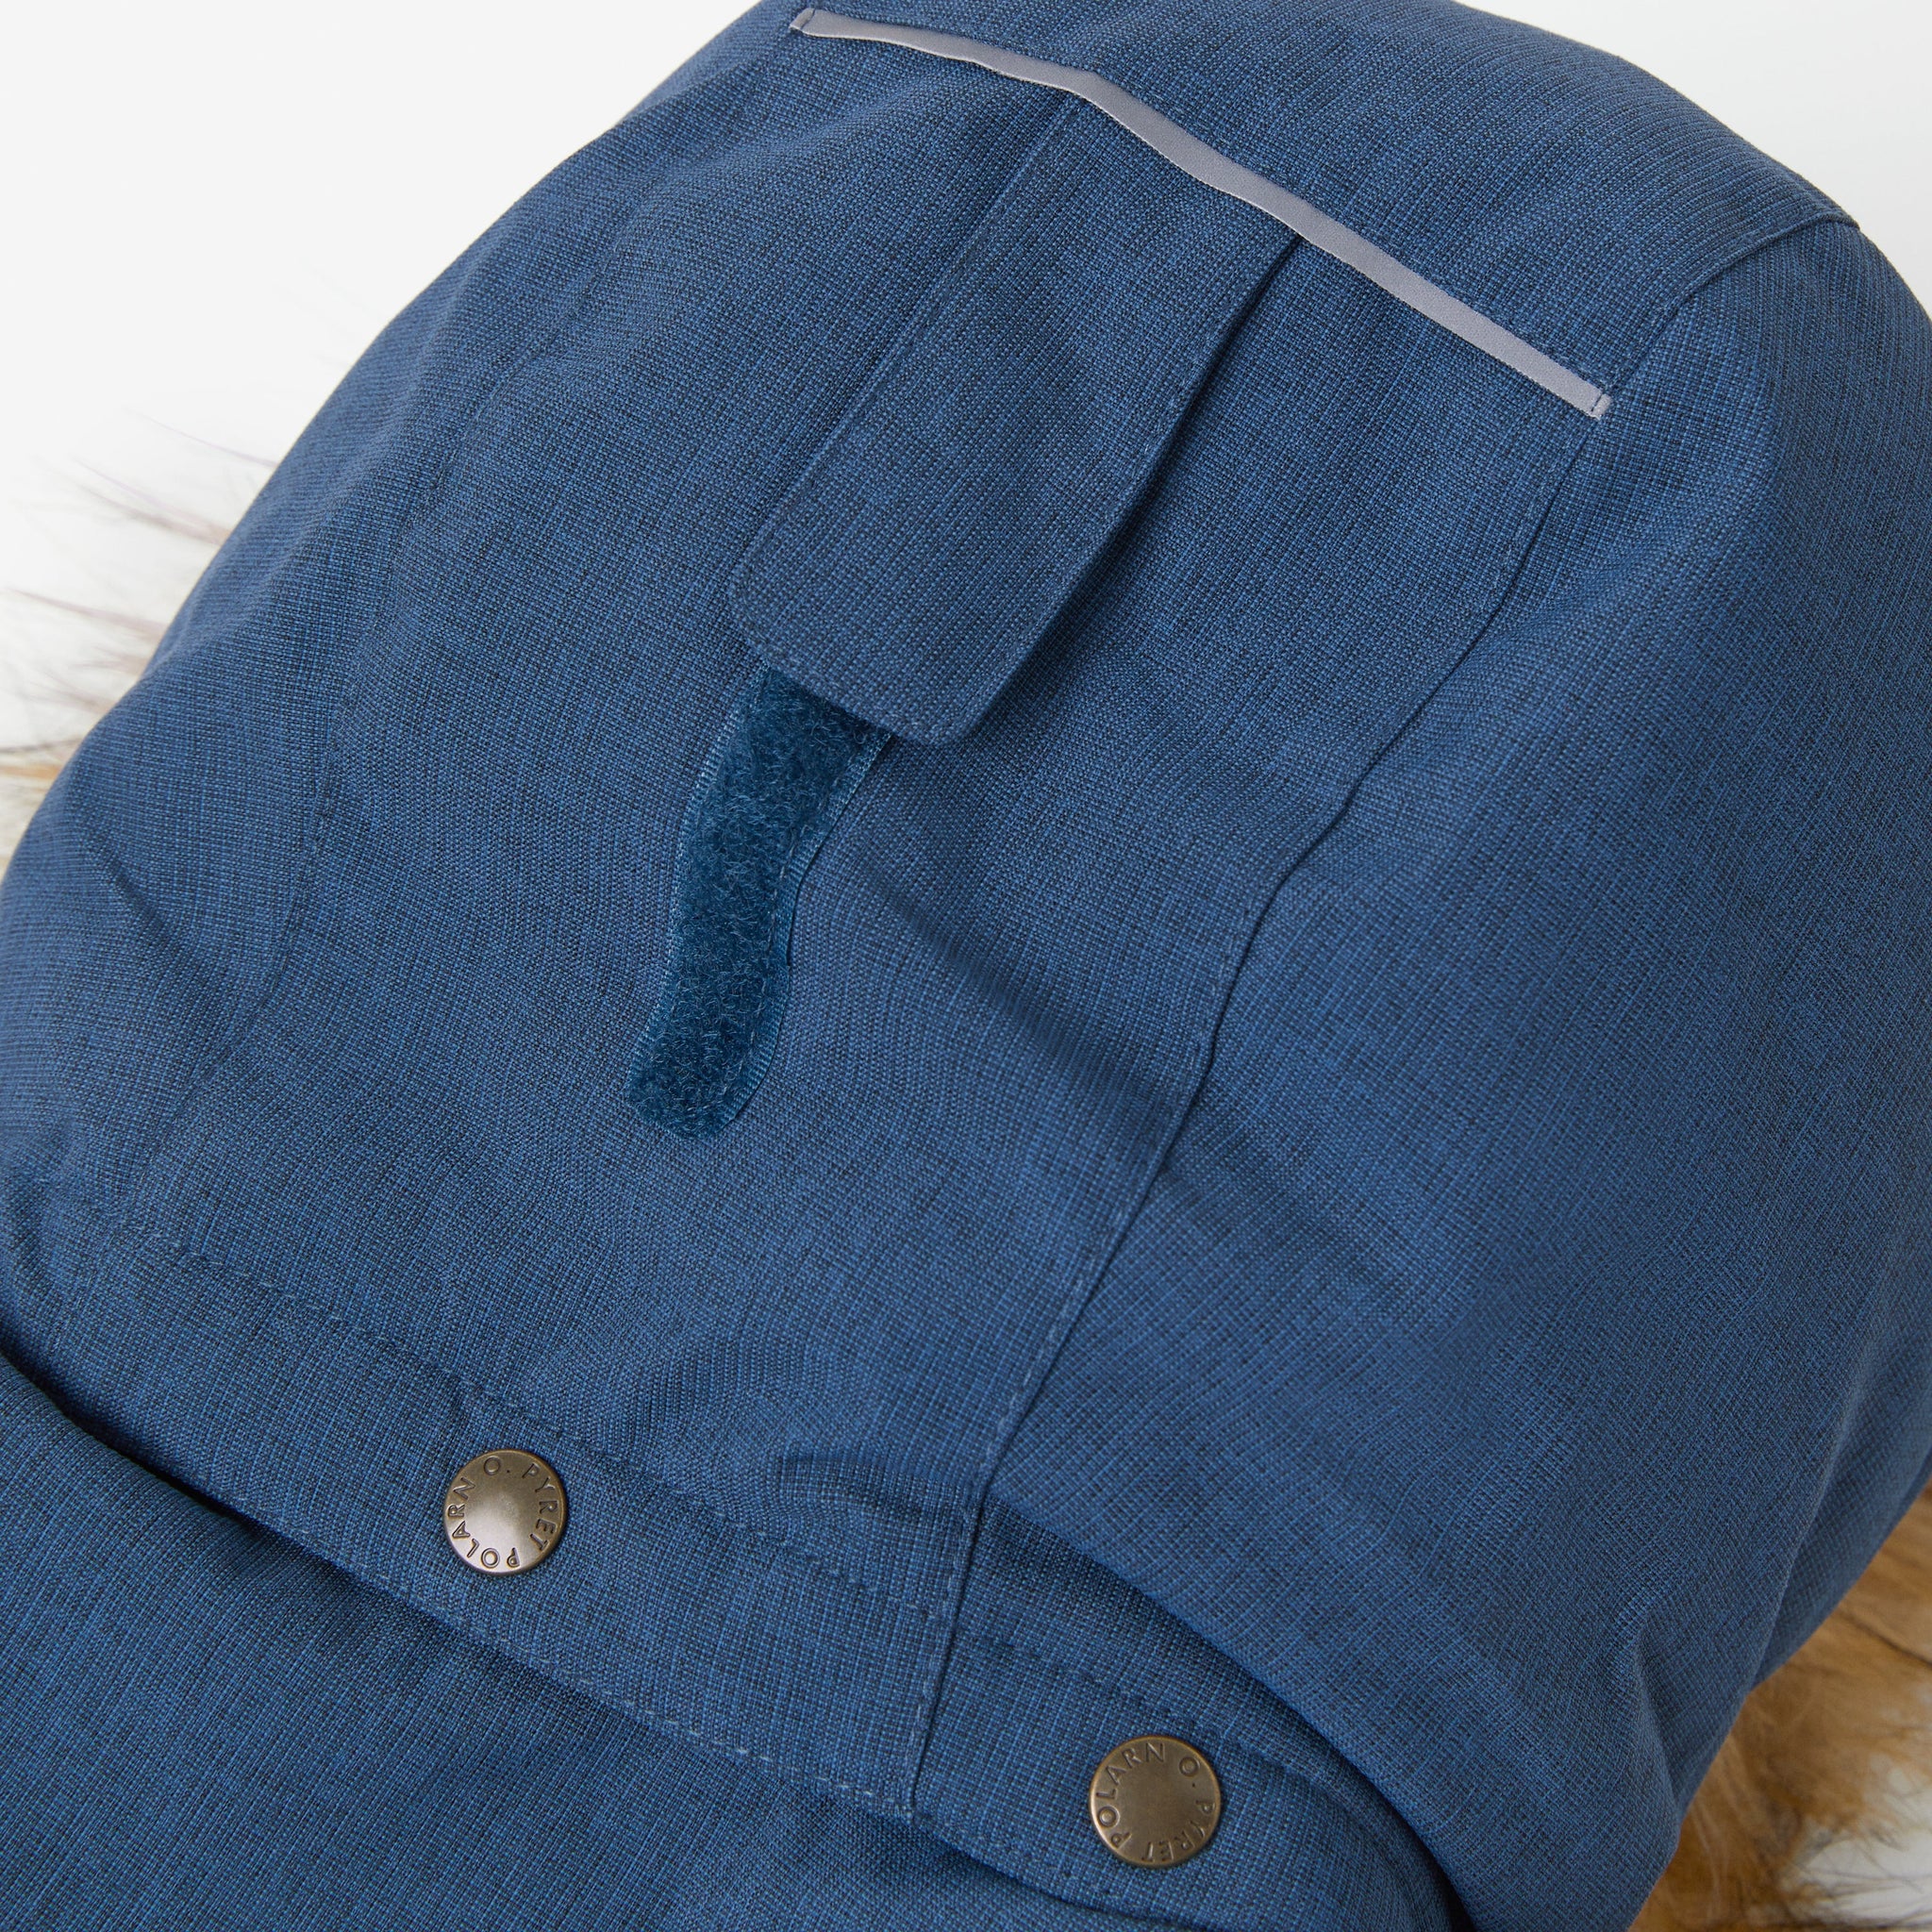 Blue Kids Waterproof Overall from the Polarn O. Pyret kidswear collection. Made using ethically sourced materials.